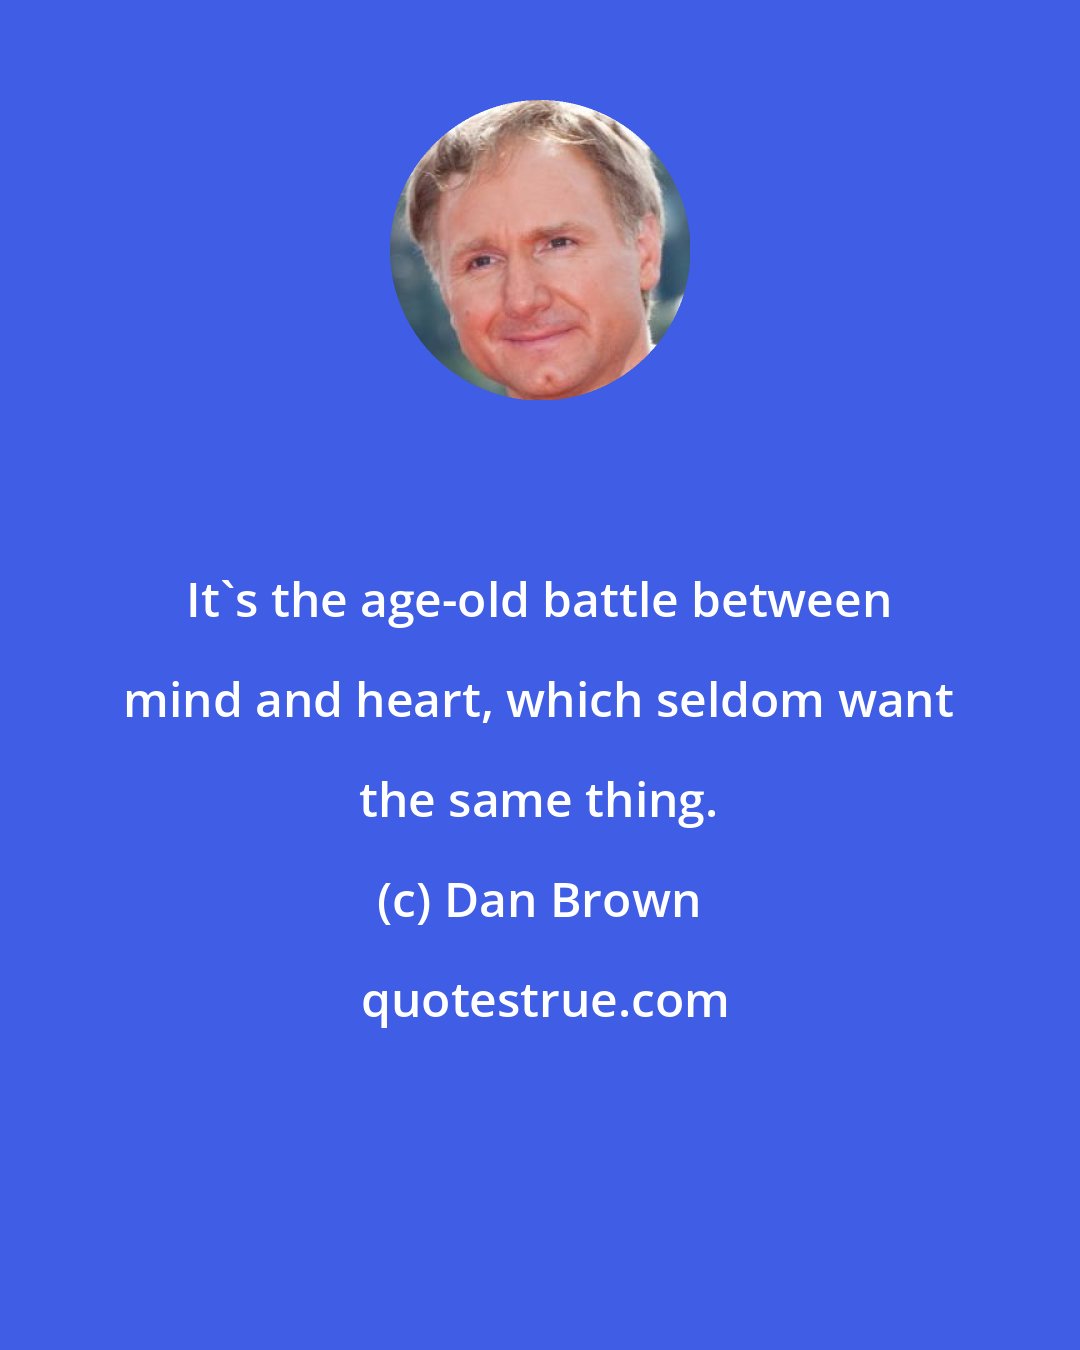 Dan Brown: It's the age-old battle between mind and heart, which seldom want the same thing.